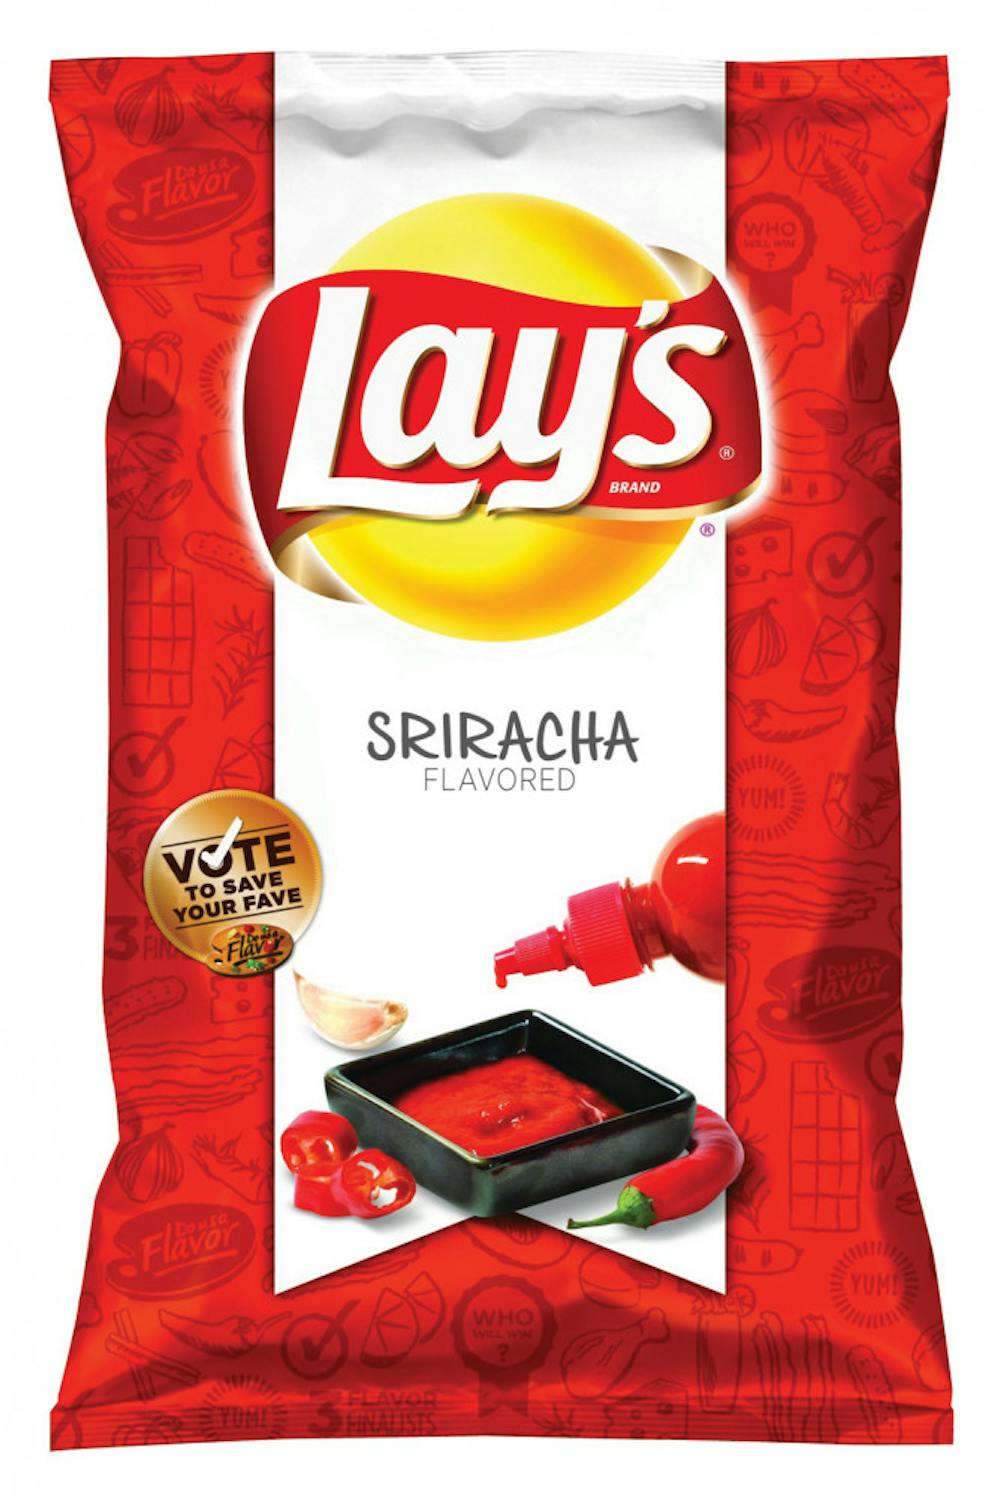 <p>This product photo provided by Lay's shows a bag of their Thai-inspired Sriracha flavored potato chips. The new flavor, along with two others - Cheesy Garlic Bread and Chicken &amp; Waffles - will be sold at retailers nationwide starting in mid-February 2013. After trying them, fans have until May to vote for their favorite. The flavor with the most votes in May will stay on store shelves. The other two will be discontinued. (AP Photo/Lay's)</p>